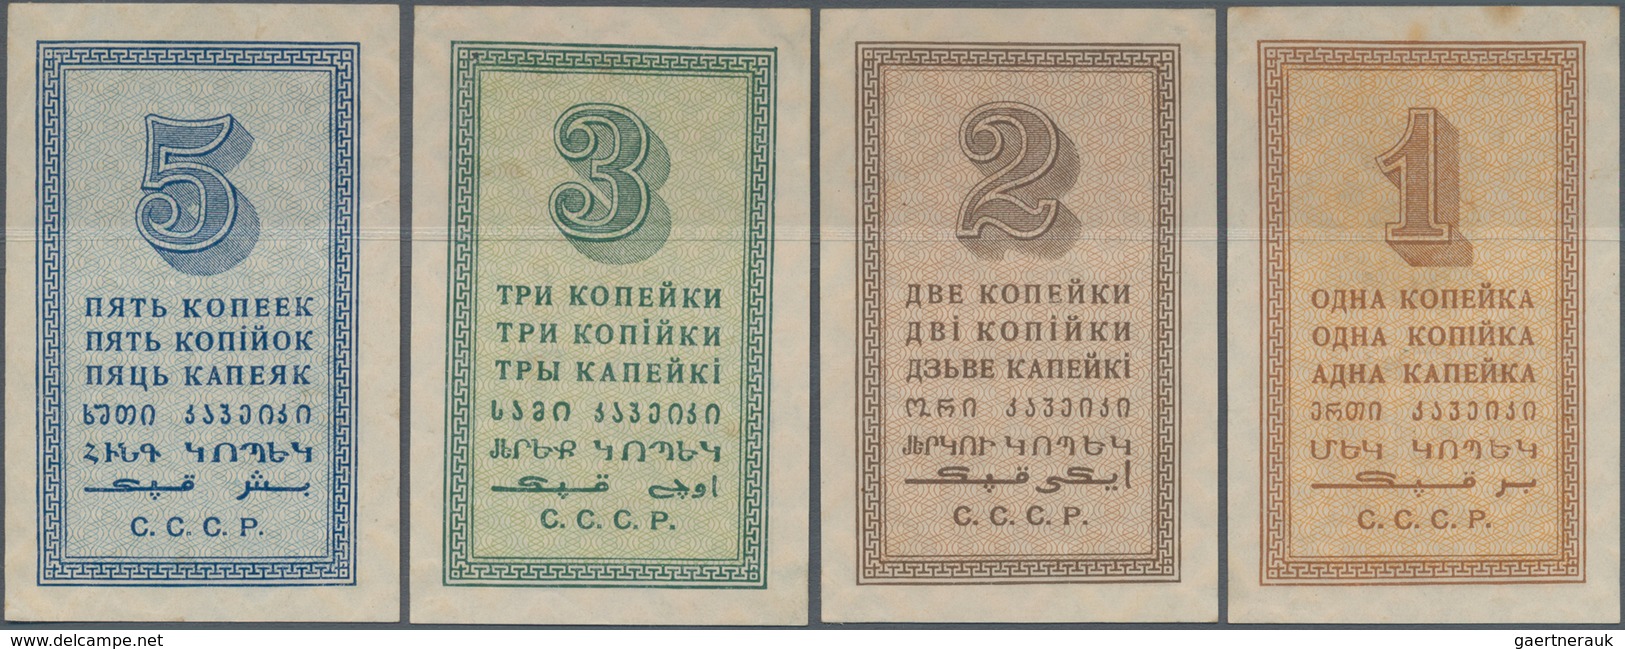 Russia / Russland: 1924 Small Change Kopek Notes Set With 1, 2, 3 And 5 Kopeks 1924, P.191-194, All - Russia